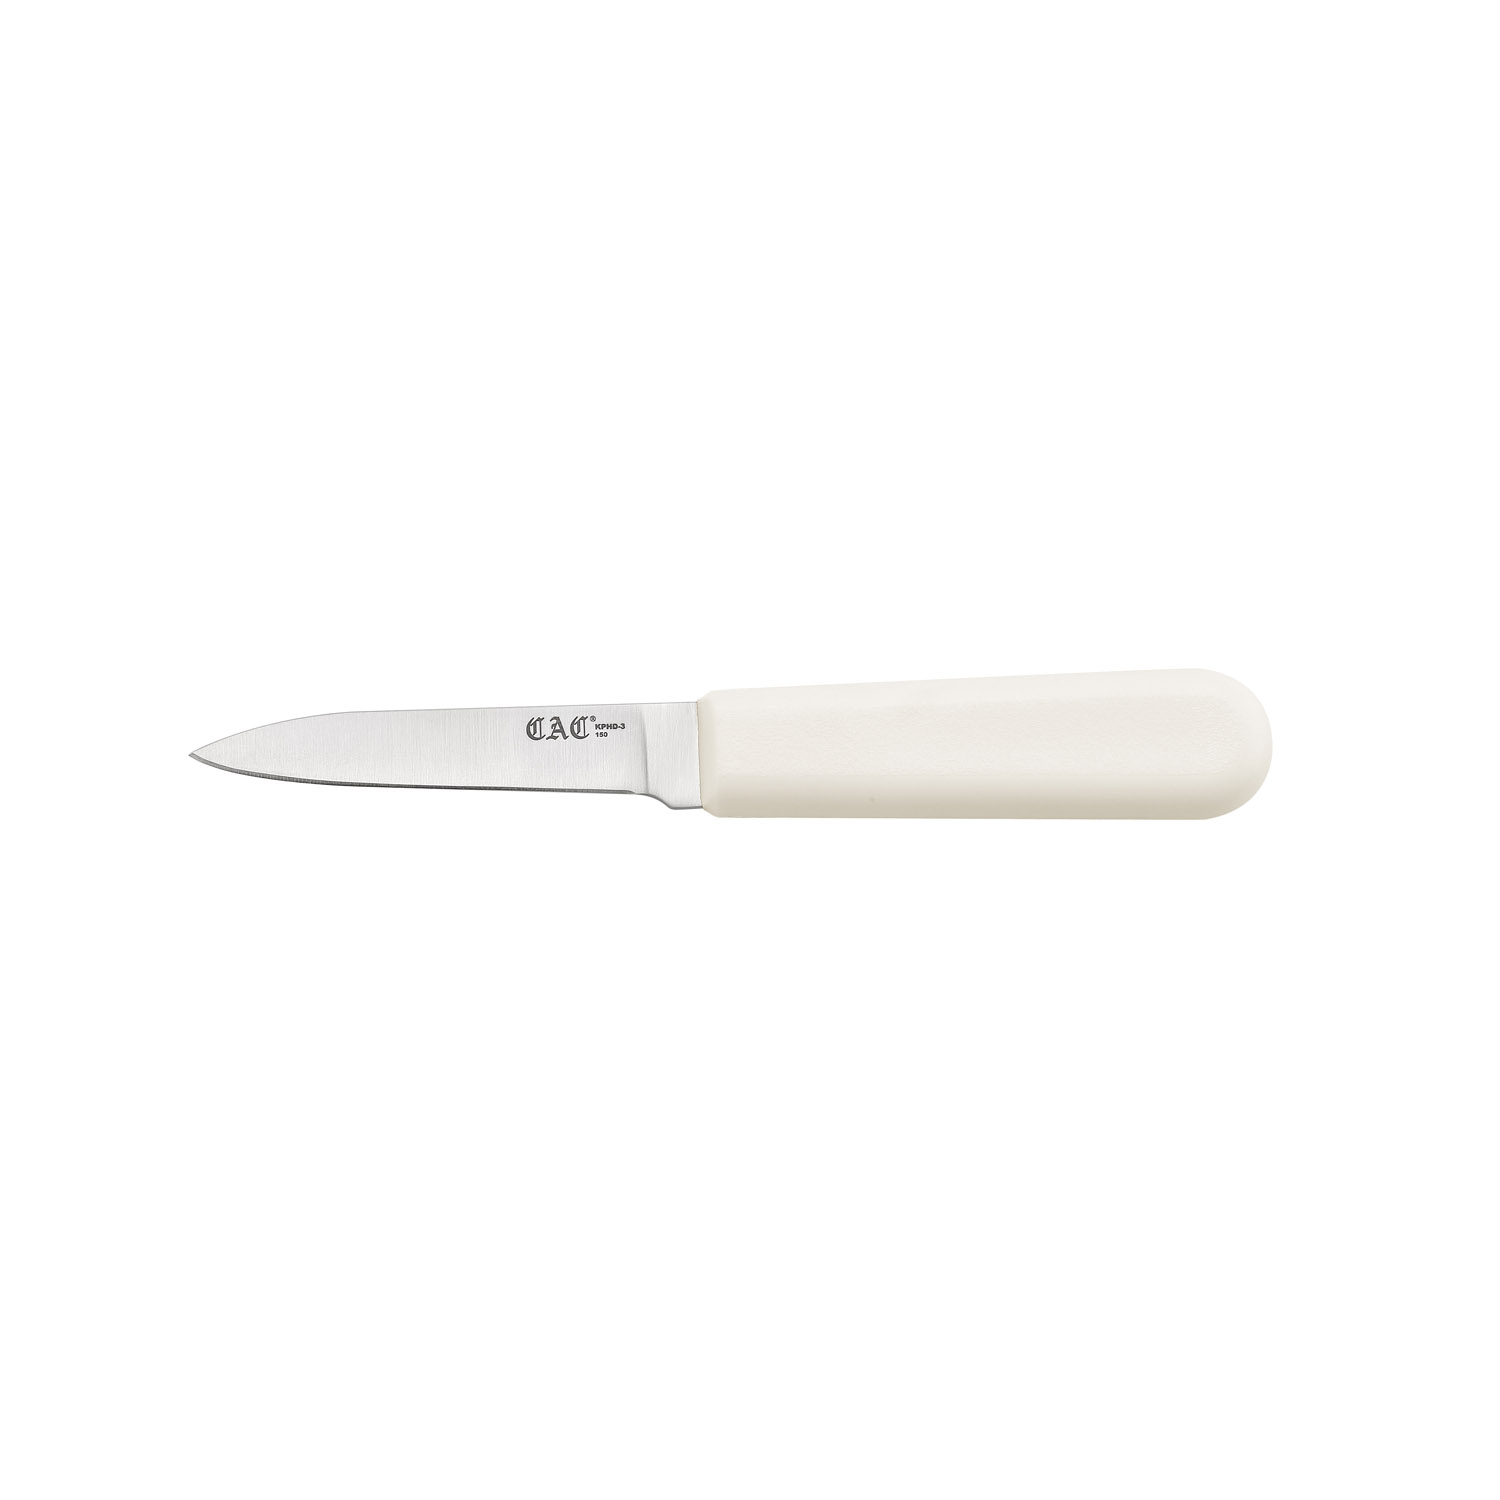 CAC China KPHD-3 Paring Knife with Pointed Tip and White Plastic Handle 3"